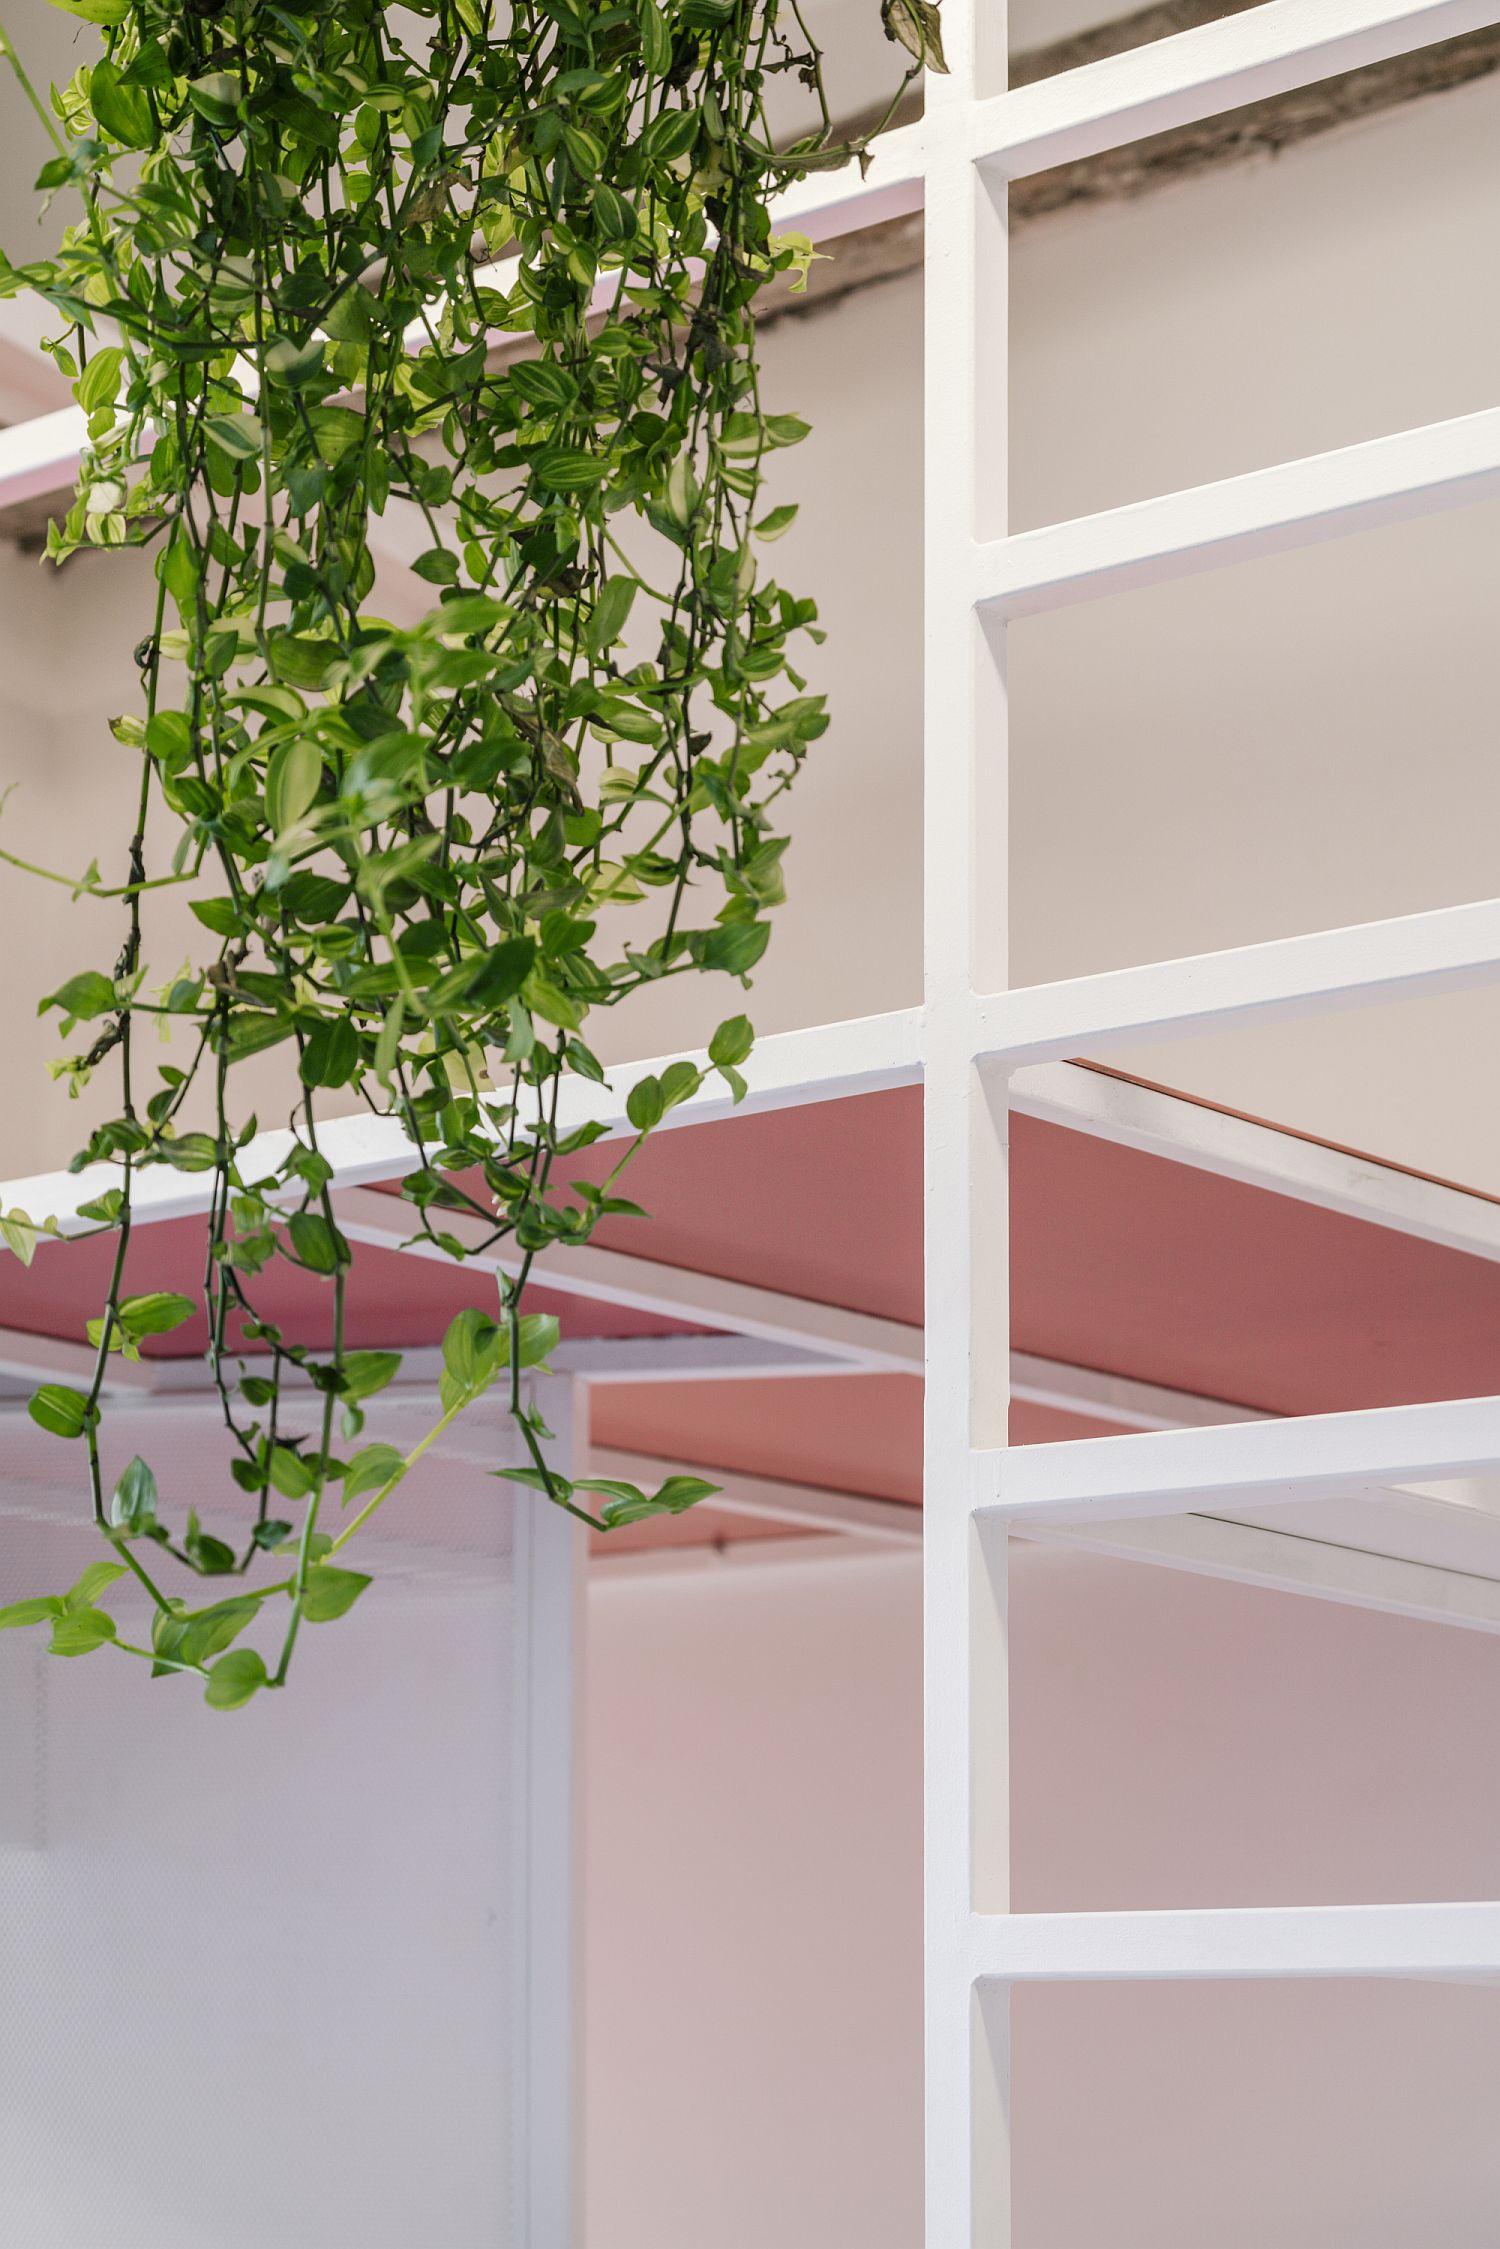 Hanging-plants-bring-greenery-into-an-apartment-filled-with-white-and-pops-if-light-pink